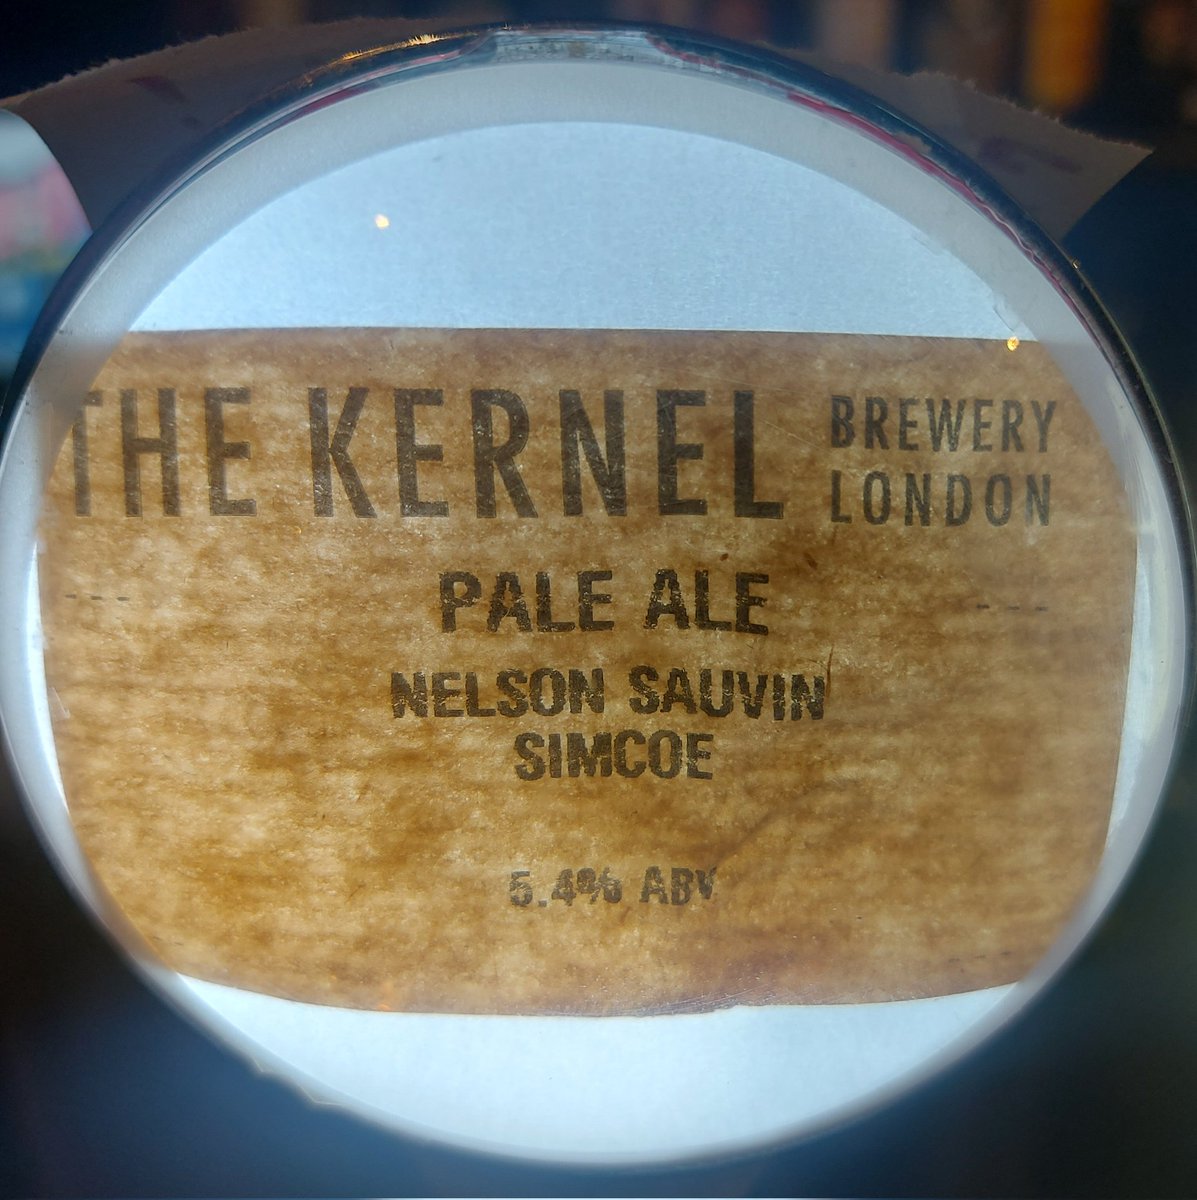 @Bitburger @CraicCommunity @galwayswestend @GrandCruBeers @ThisIsGalway @boundarybrewing @kernelbrewery has returned! A Pale Ale this time round, Nelson Sauvin makes it a particularly refreshing drop, as ever small amounts available & when its gone it is gone! #Galway #Craftbeer #Shoplocal #Supportlocal